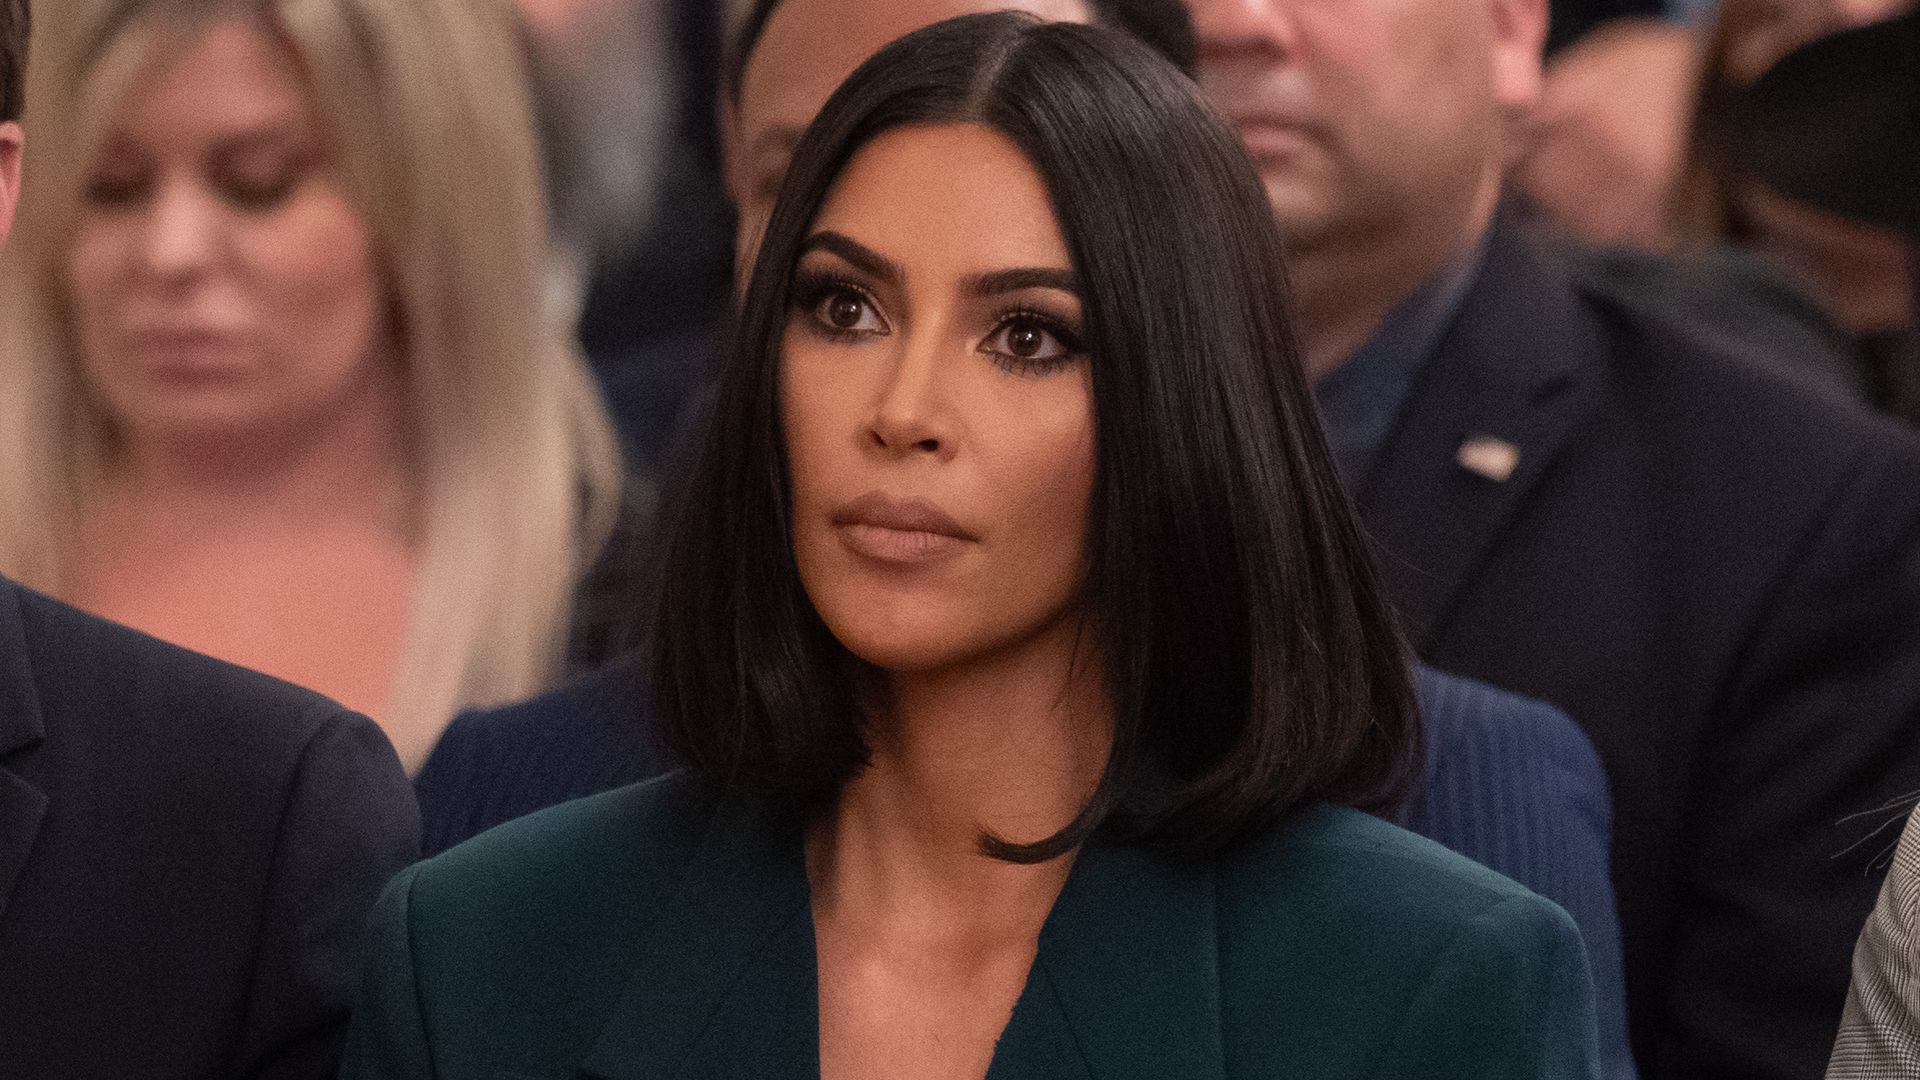 Kim Kardashian in the East Room of the White House in Washington, DC, June 13, 2019.